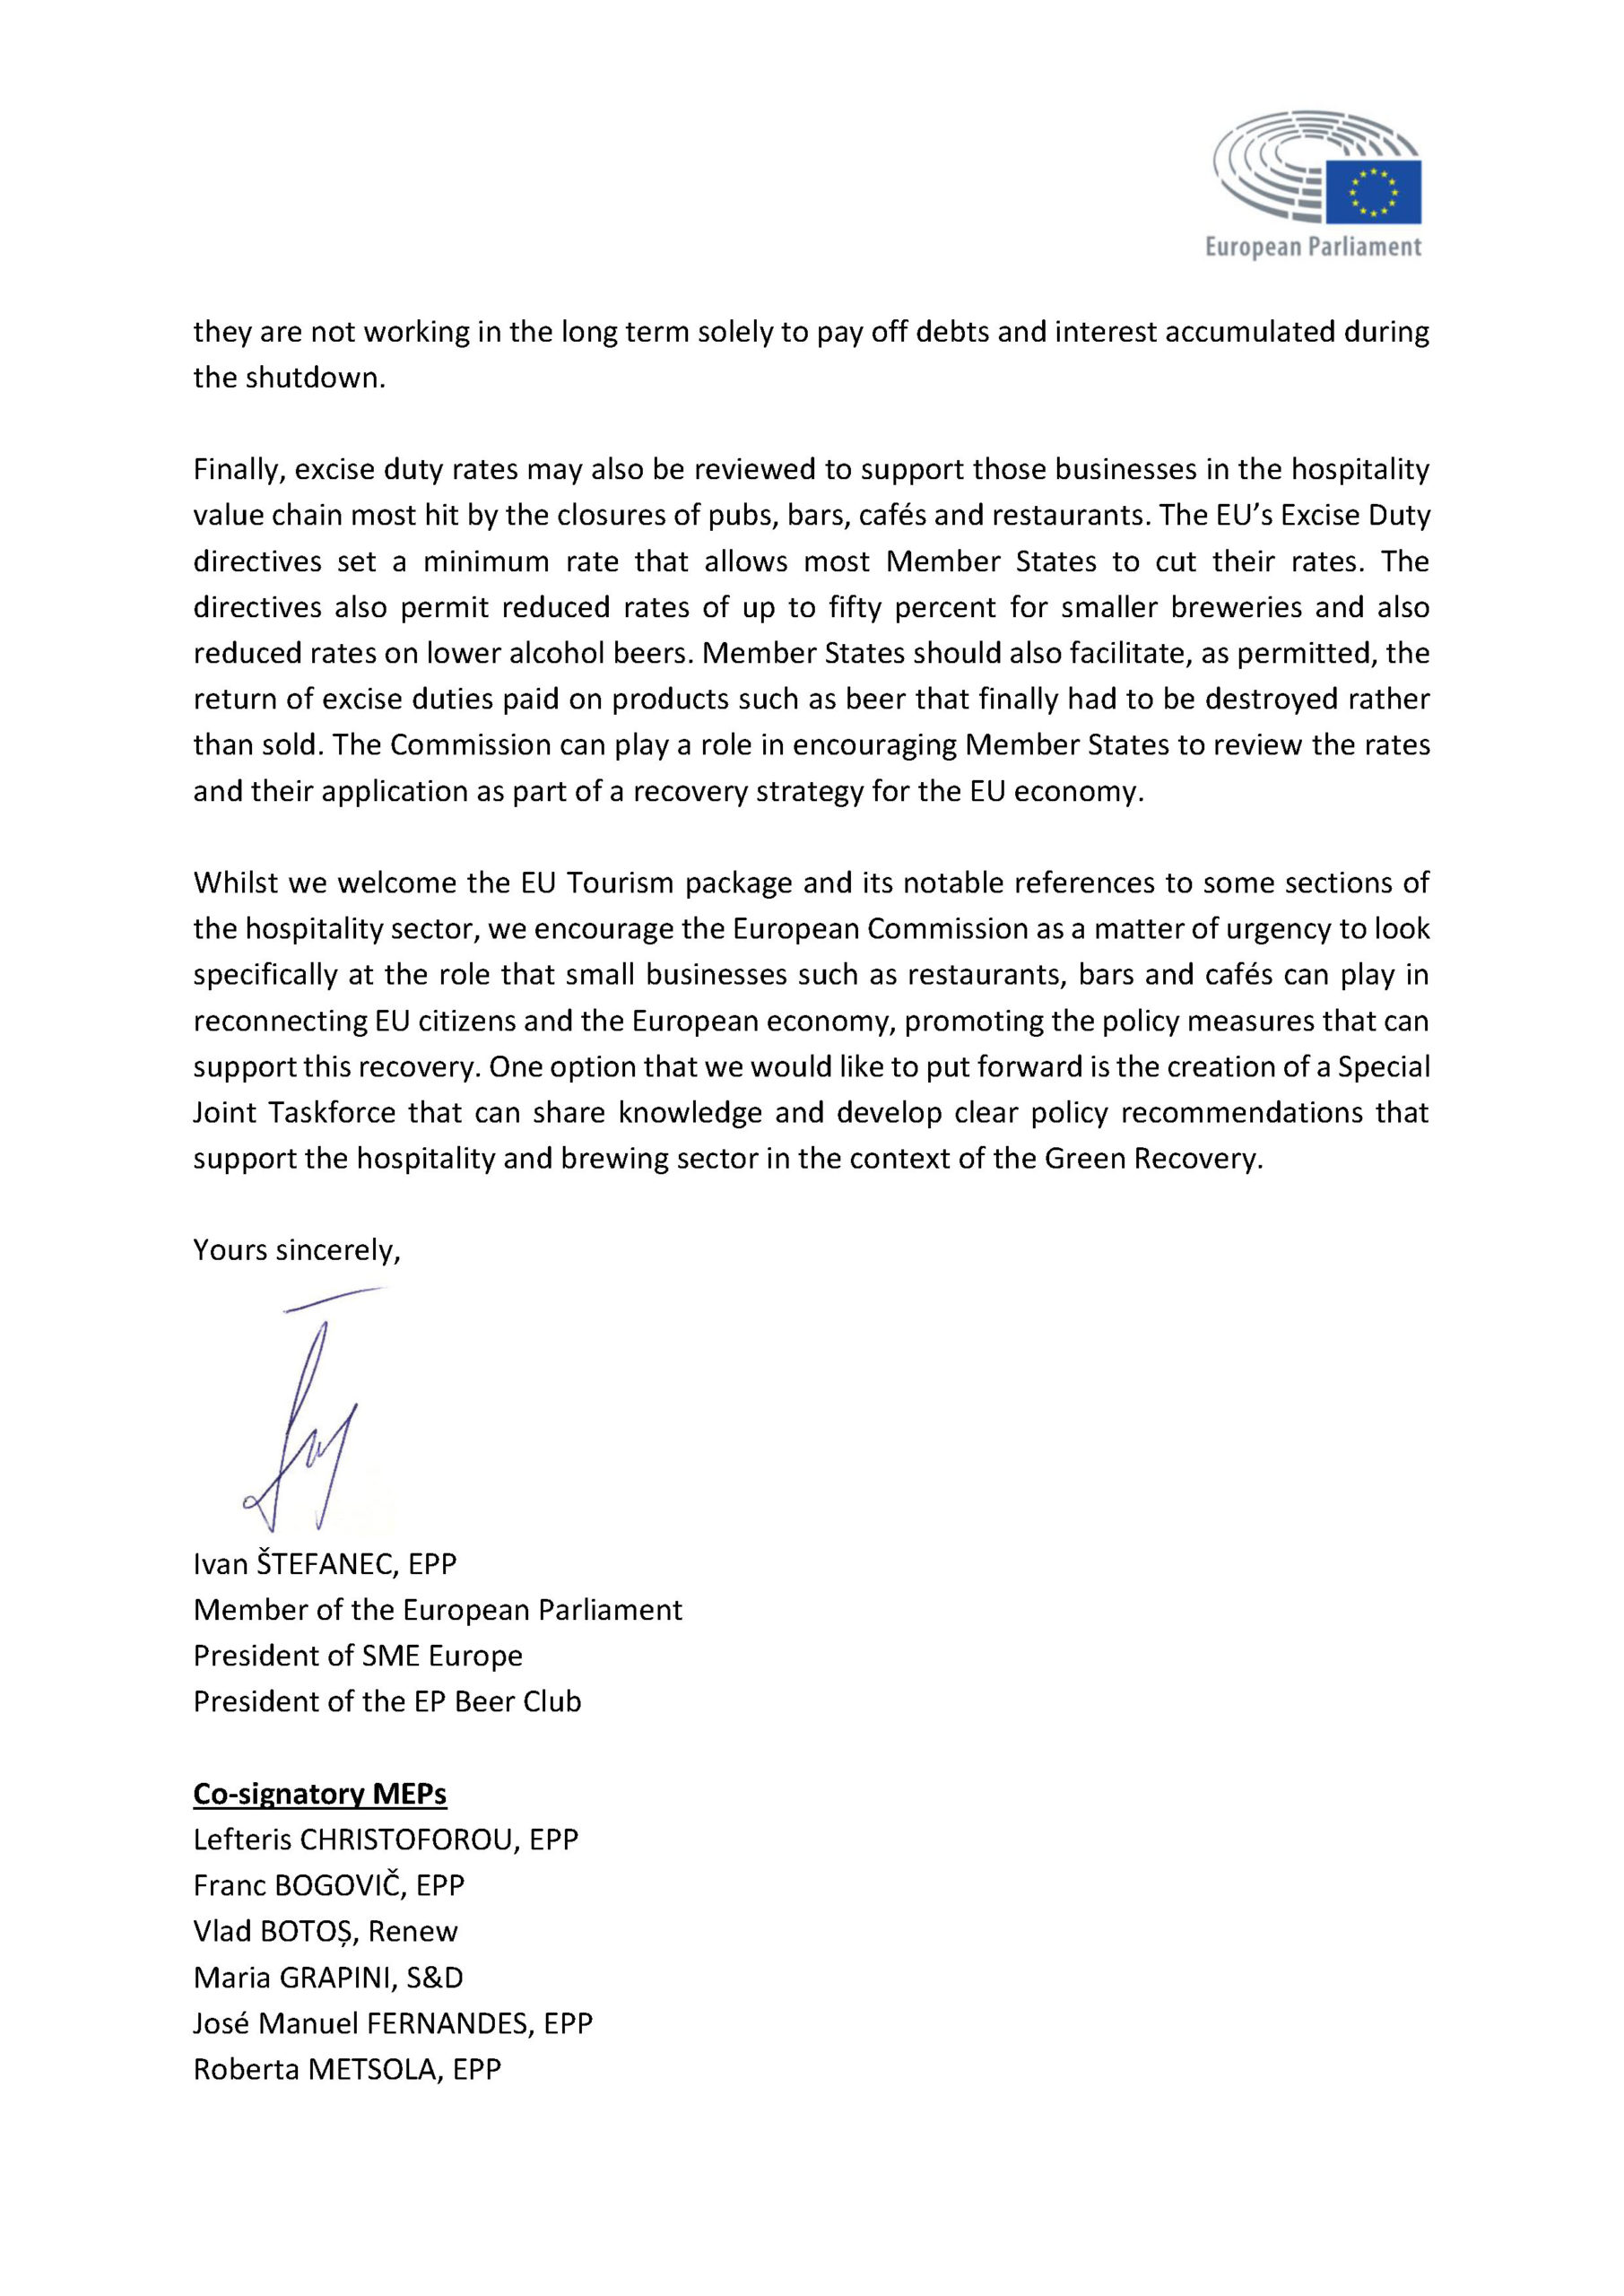 Letter on supporting the recovery of Europe's hospitality sector - page 3